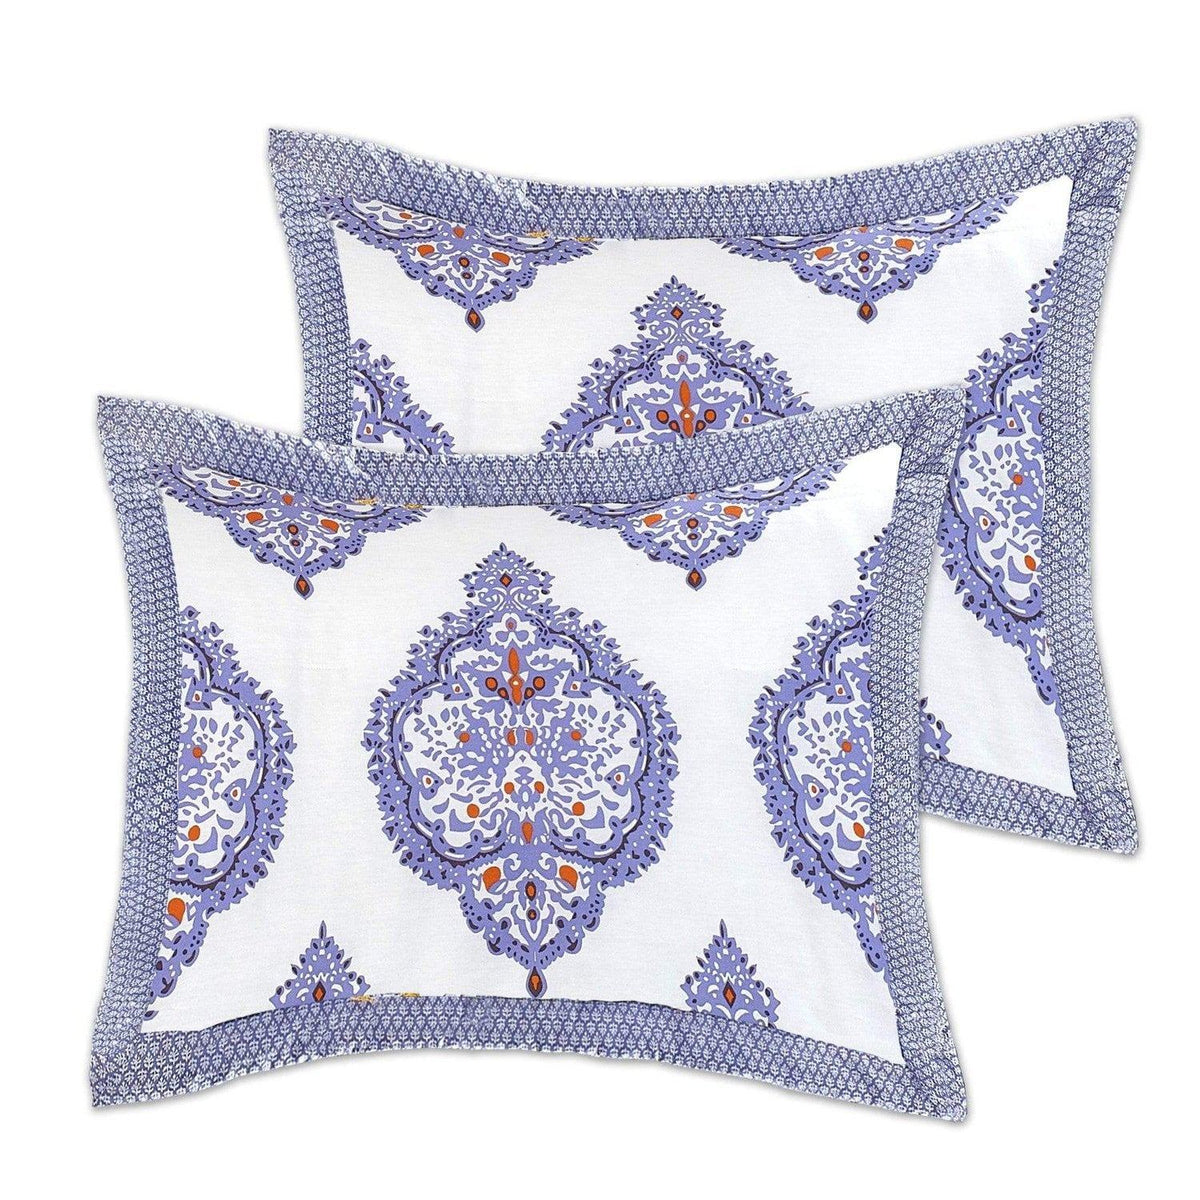 Chic Home Grand Palace 3 Piece 100% Cotton Comforter Set Reversible Global Inspired Print Lavender 